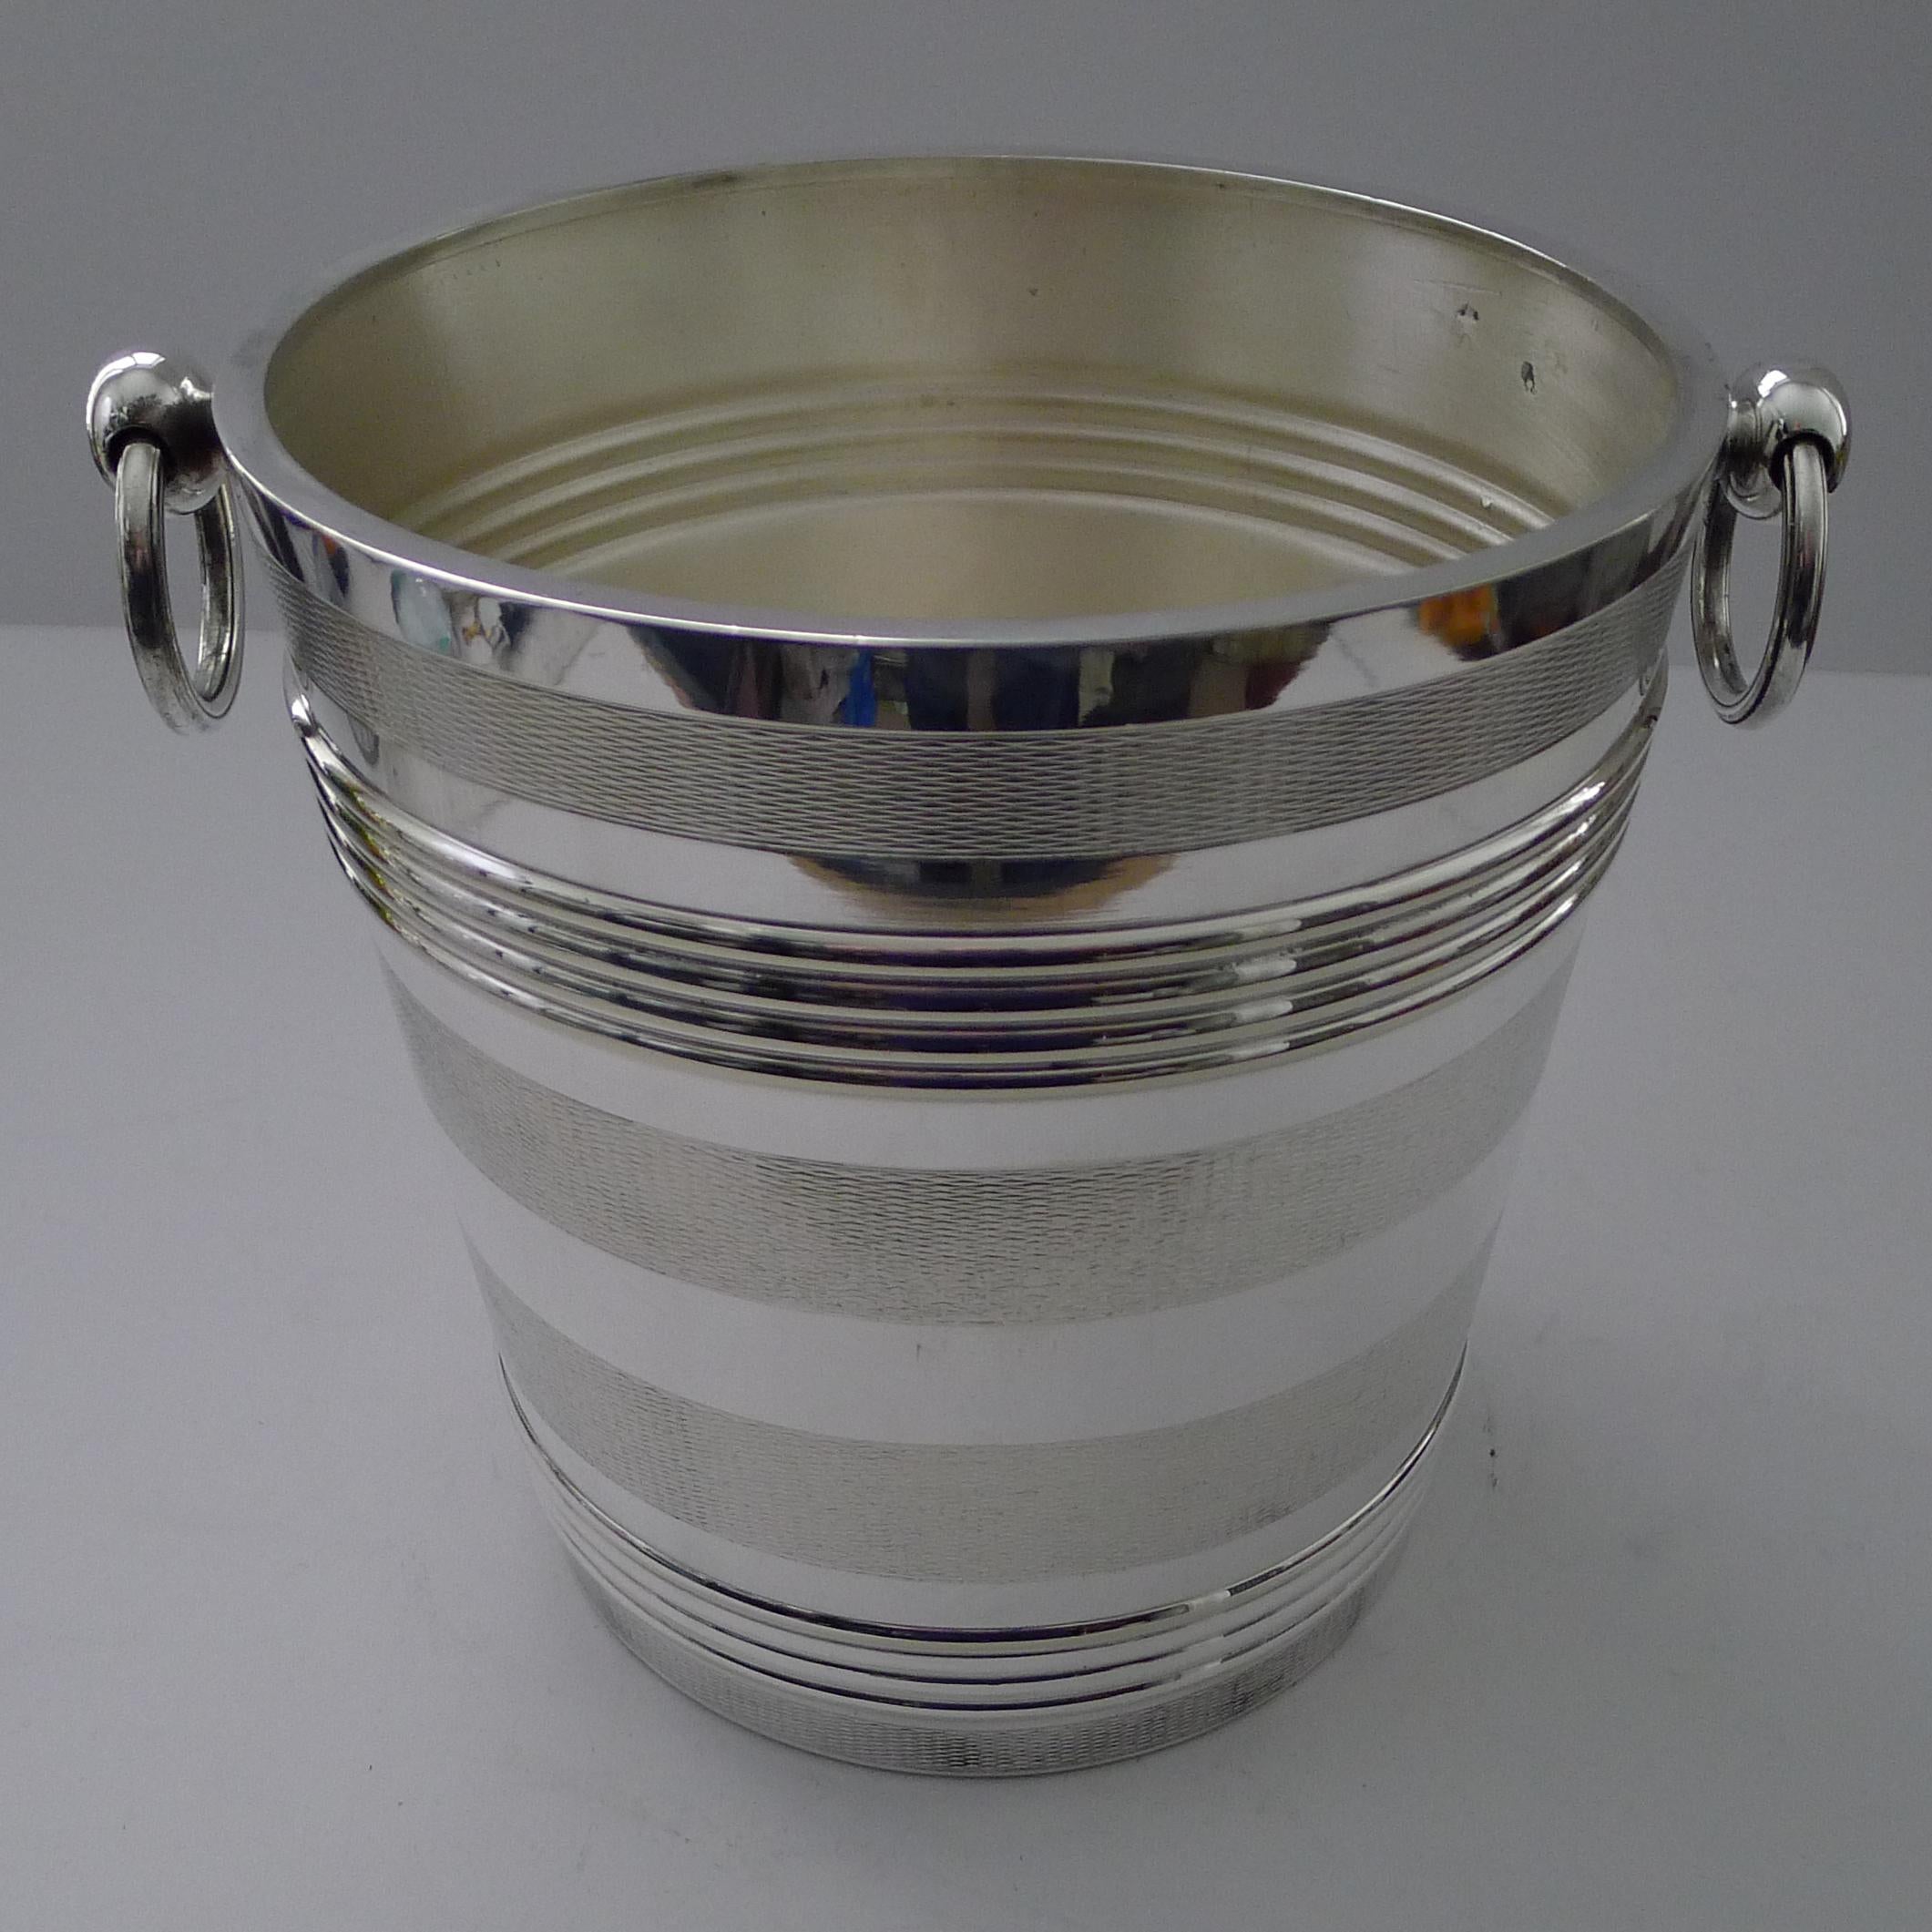 A rare example from the creme de la creme of French silversmith's, Orfèvrerie Christofle of Paris.

This grand silver plated Champagne bucket or wine cooler is beautifully decorated with engine turned bands running around the sides, typically Art